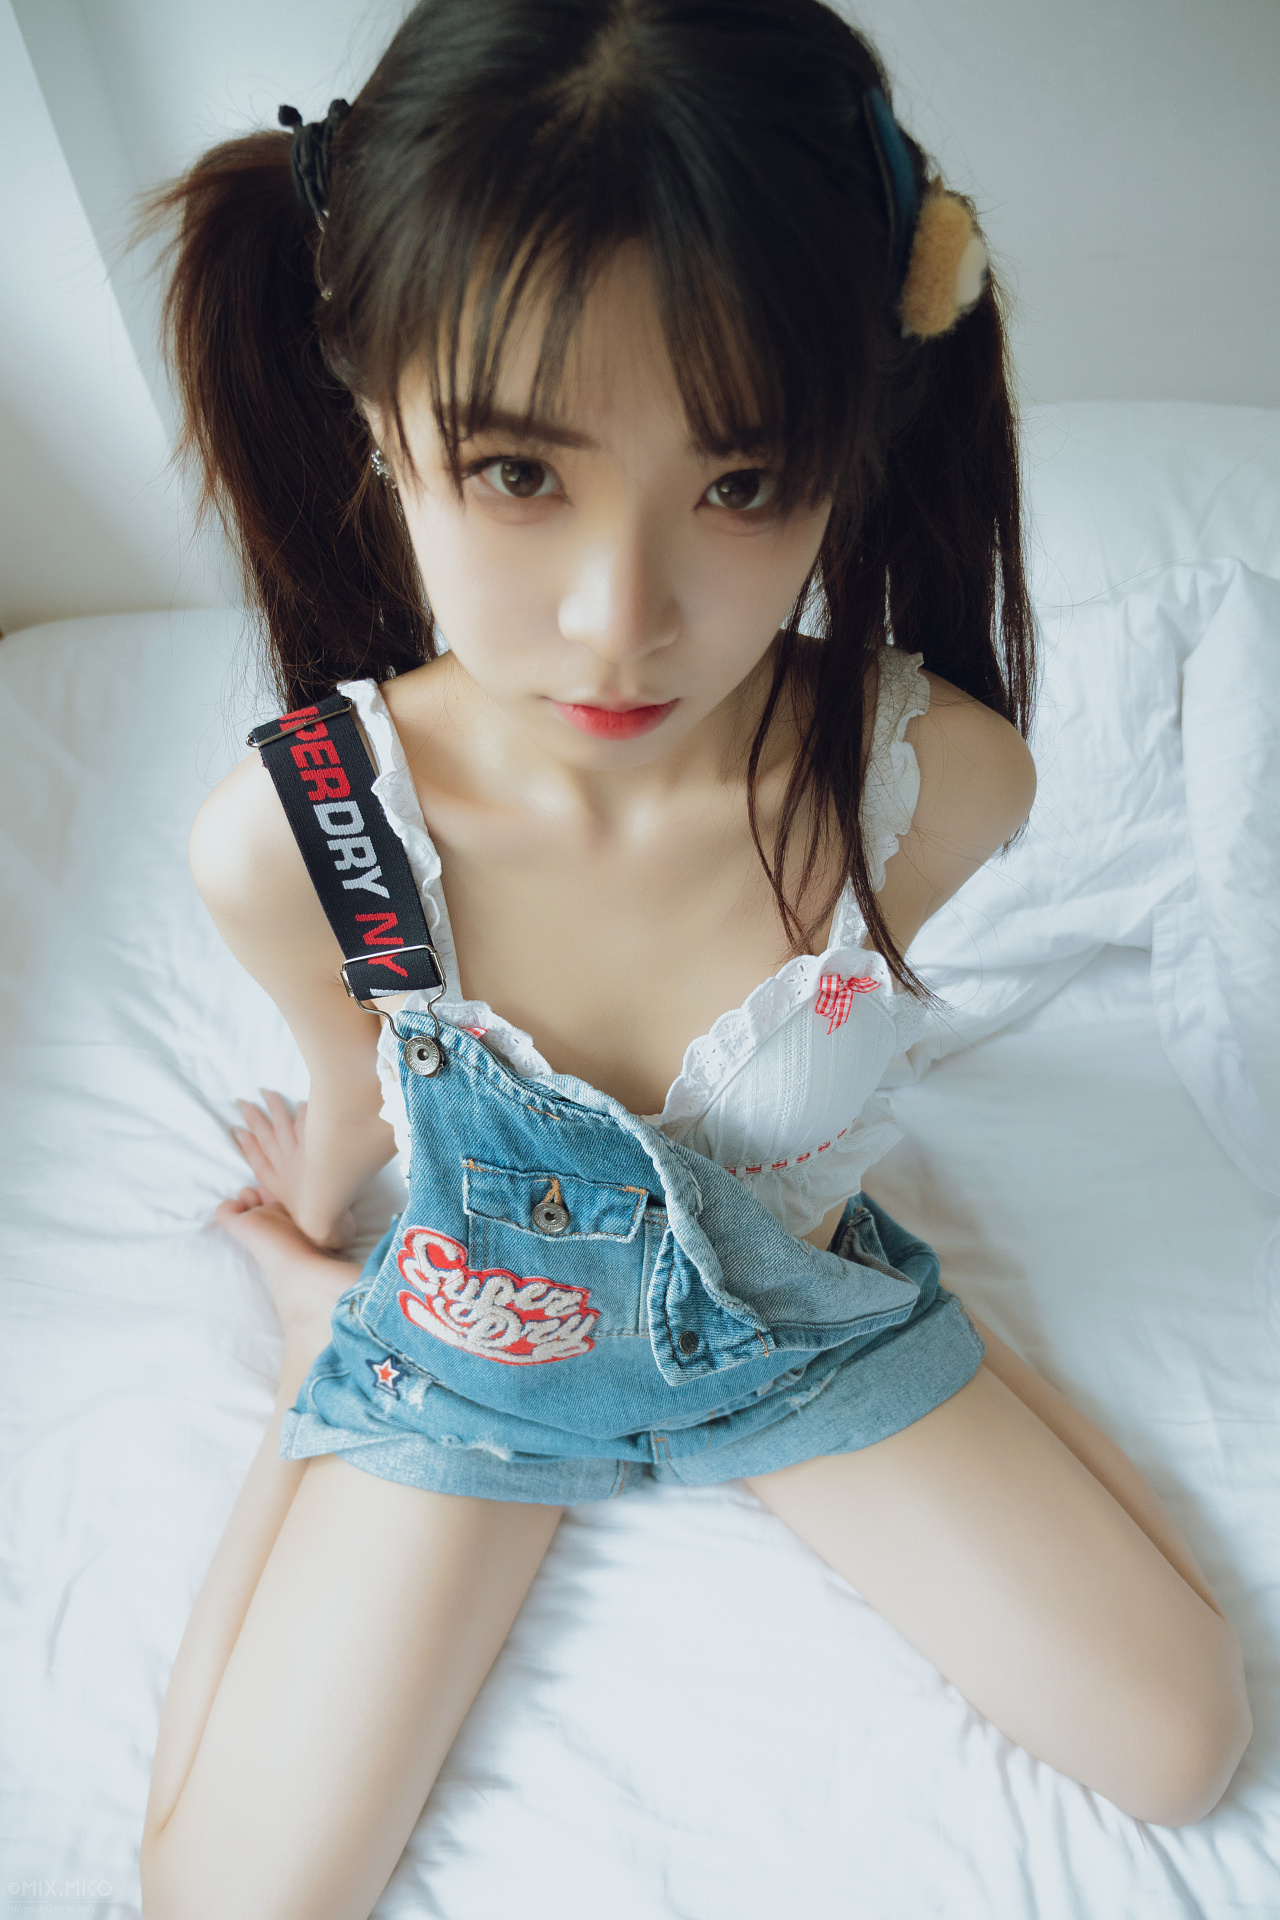 People 1280x1920 Chinese model model Asian women twintails brunette dark hair pale small boobs legs barefoot feet sitting in bed looking at viewer